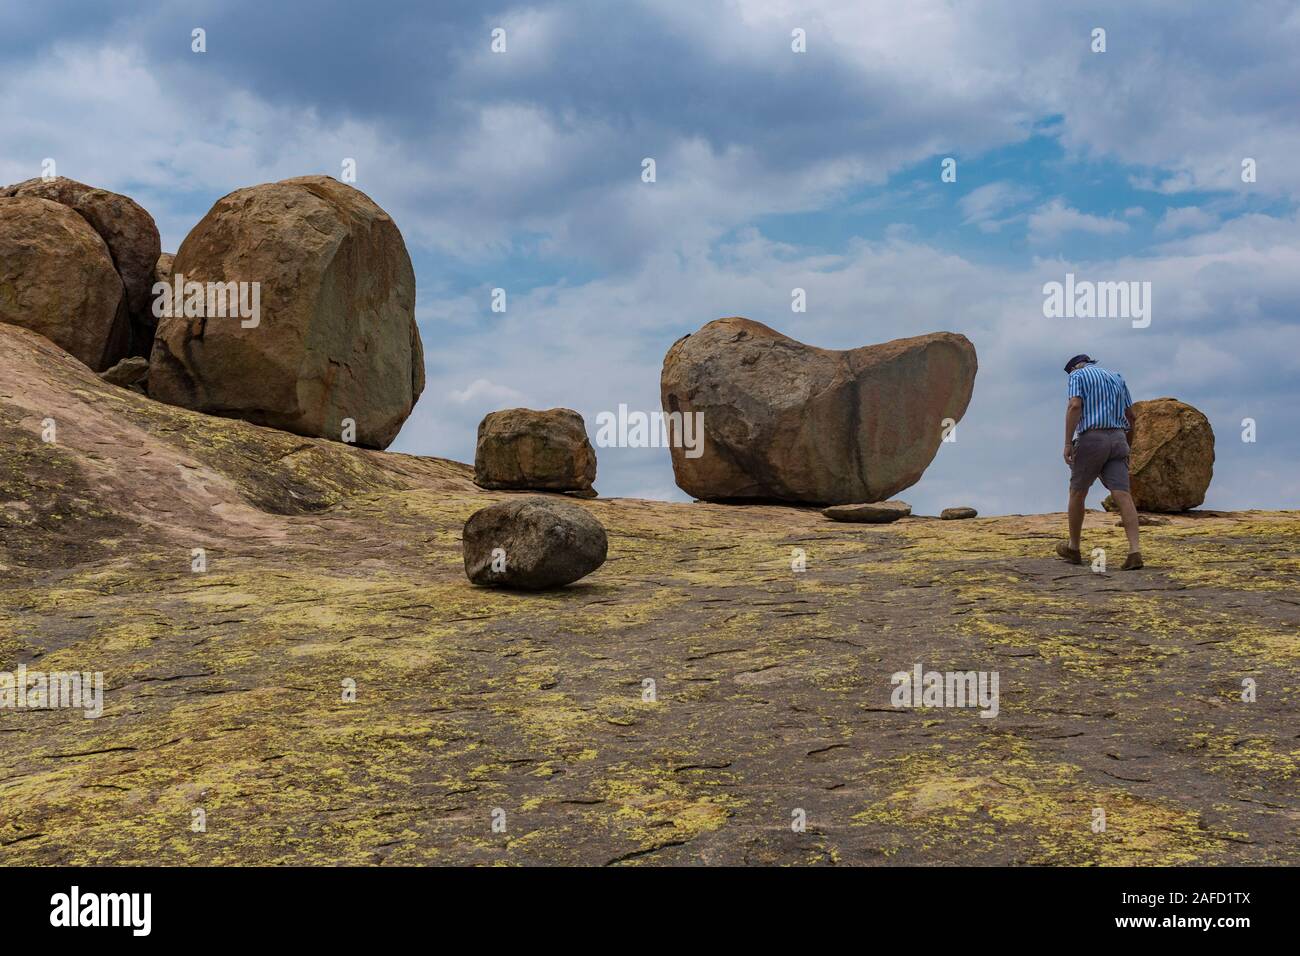 A man climbs to the top of 'World's view' hill in Matobo Hills National Park, Zimbabwe. The place is known for its 360-degree stunning viewes and the famous balancing rocks, which were the reason that explorer and magnate Cecil Rhodes has chosen to be burried there. Stock Photo